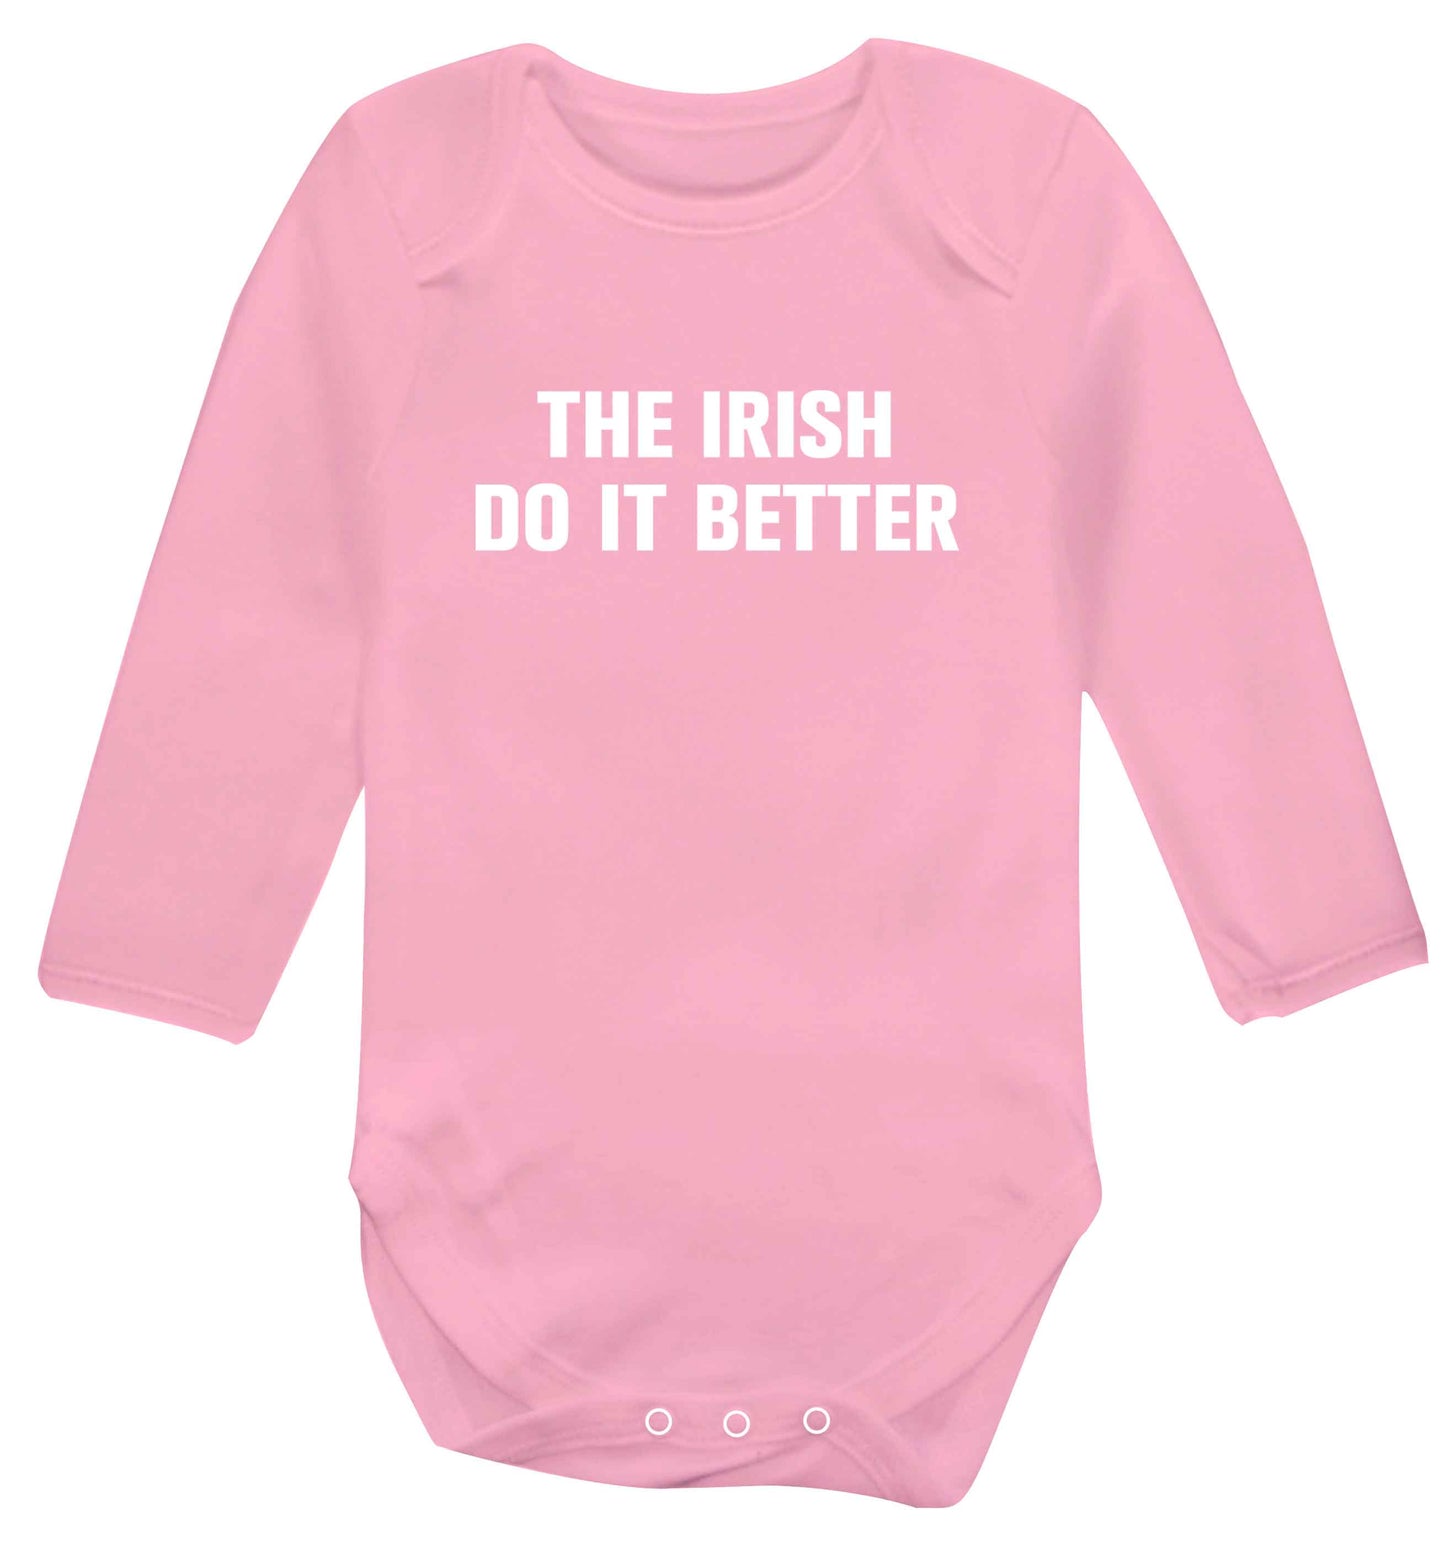 The Irish do it better baby vest long sleeved pale pink 6-12 months